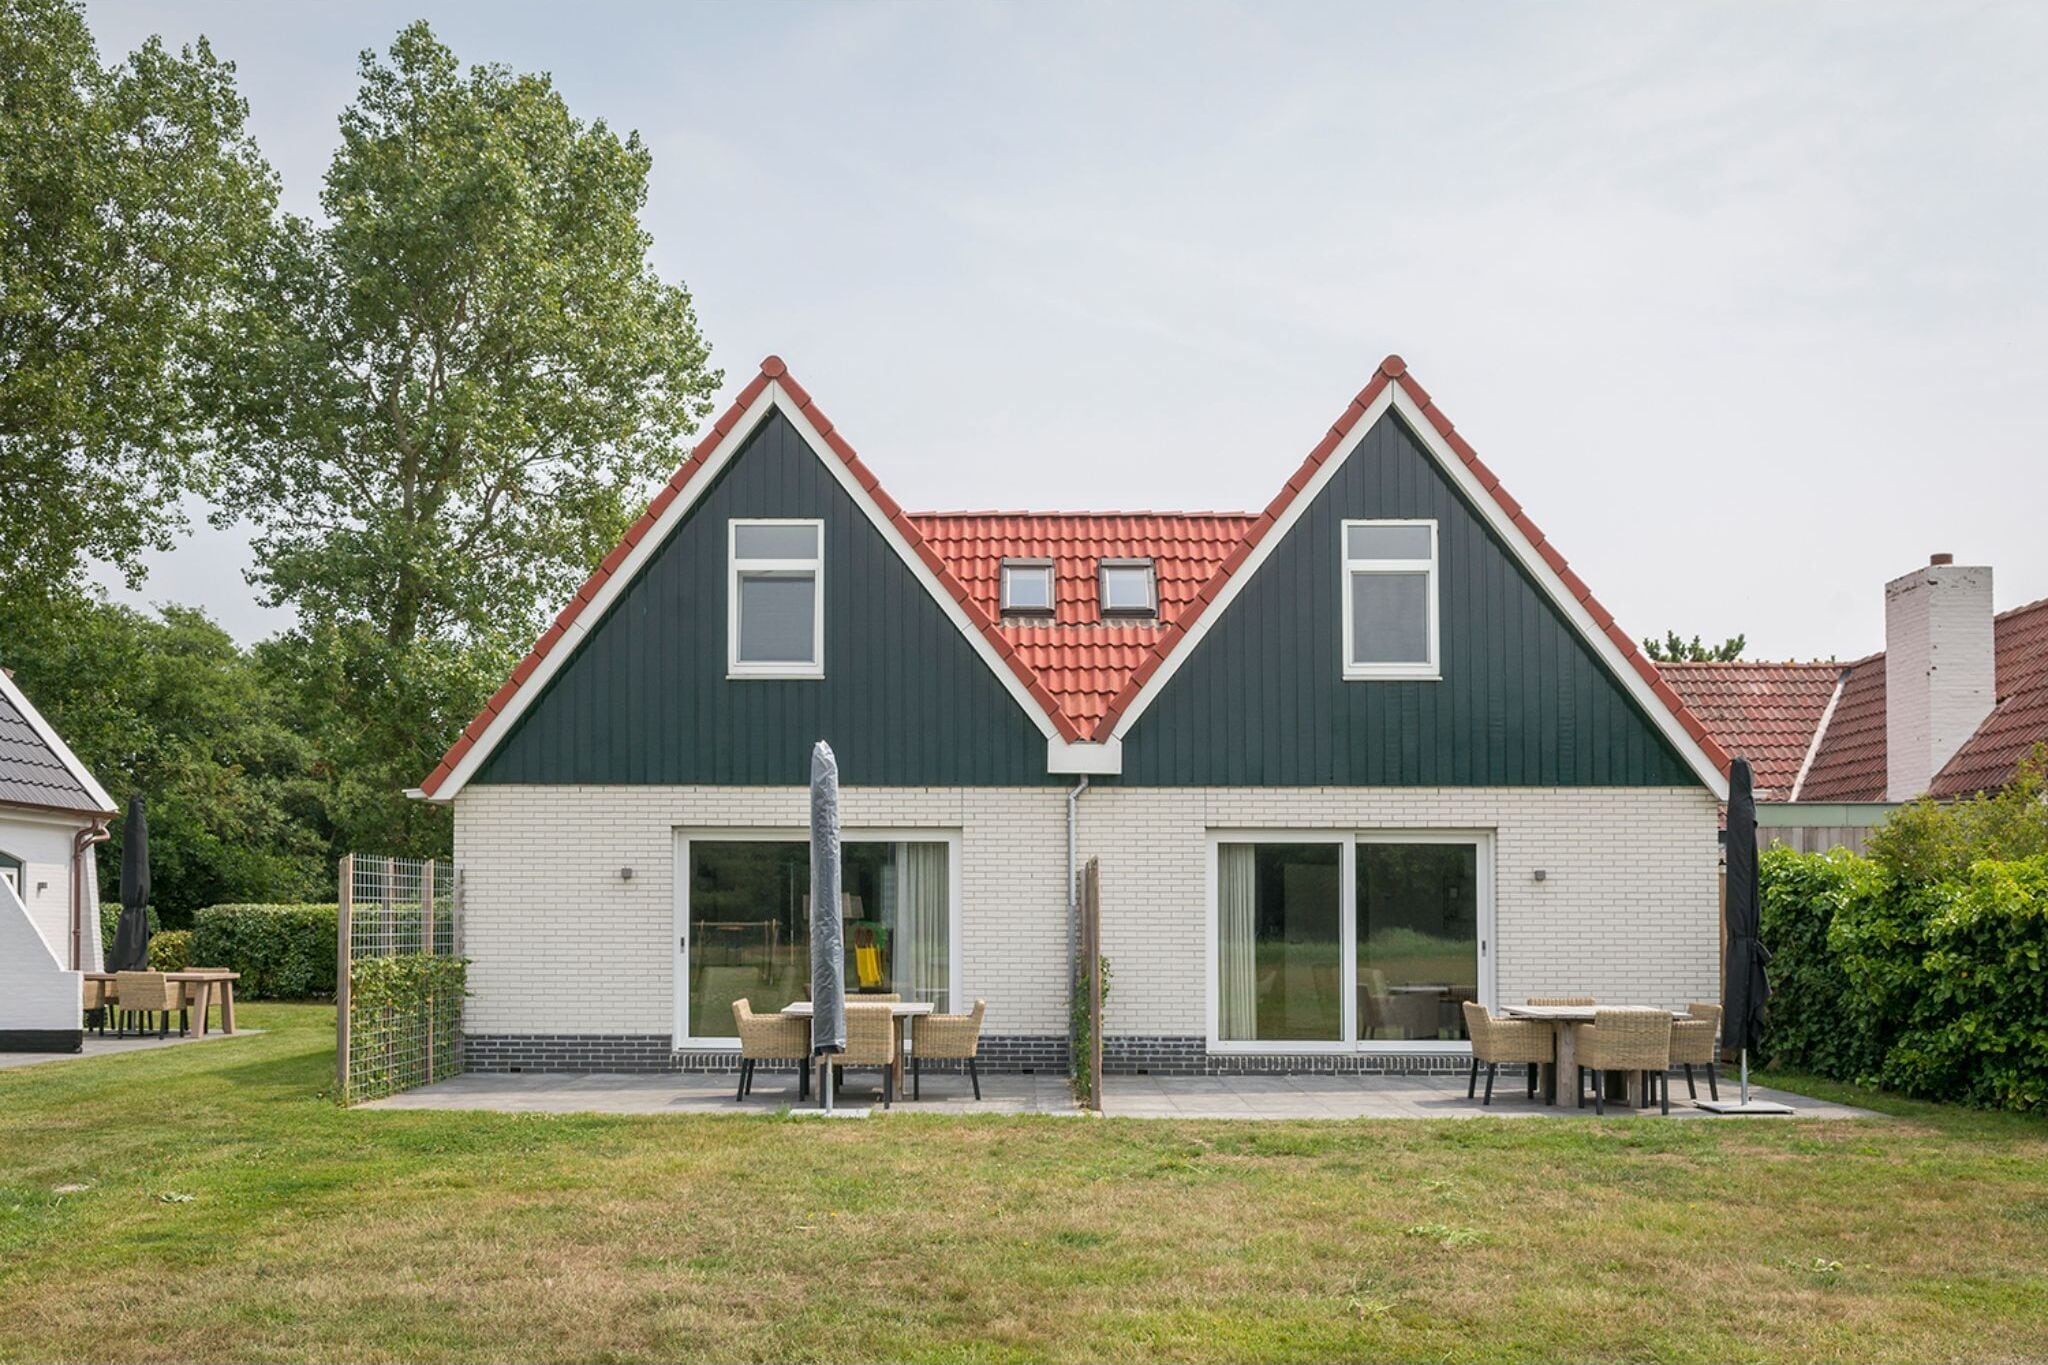 Bungalow on Texel with a spacious terrace